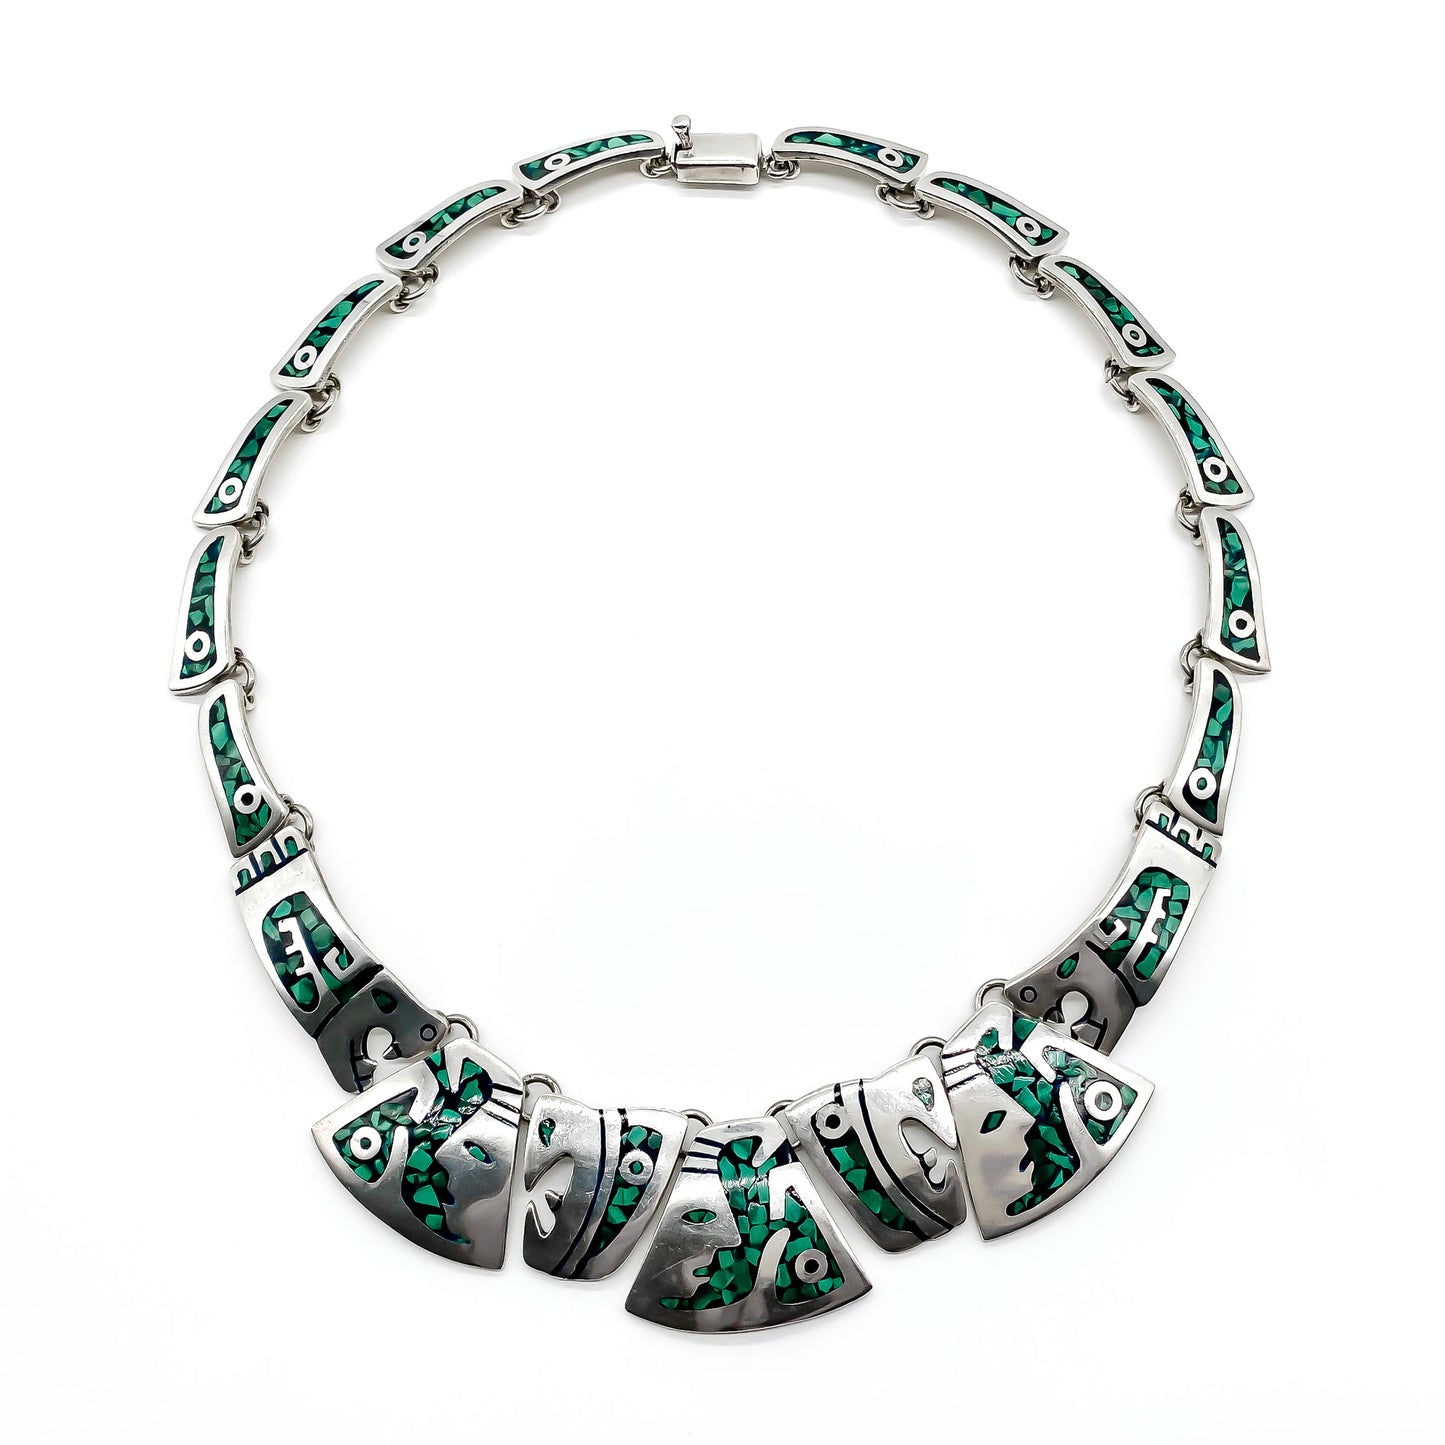 Very unusual vintage sterling silver Mexican set consisting of a necklace, bracelet and stud earrings, with a malachite inlay and geometric face design. TC-29 Post 1980